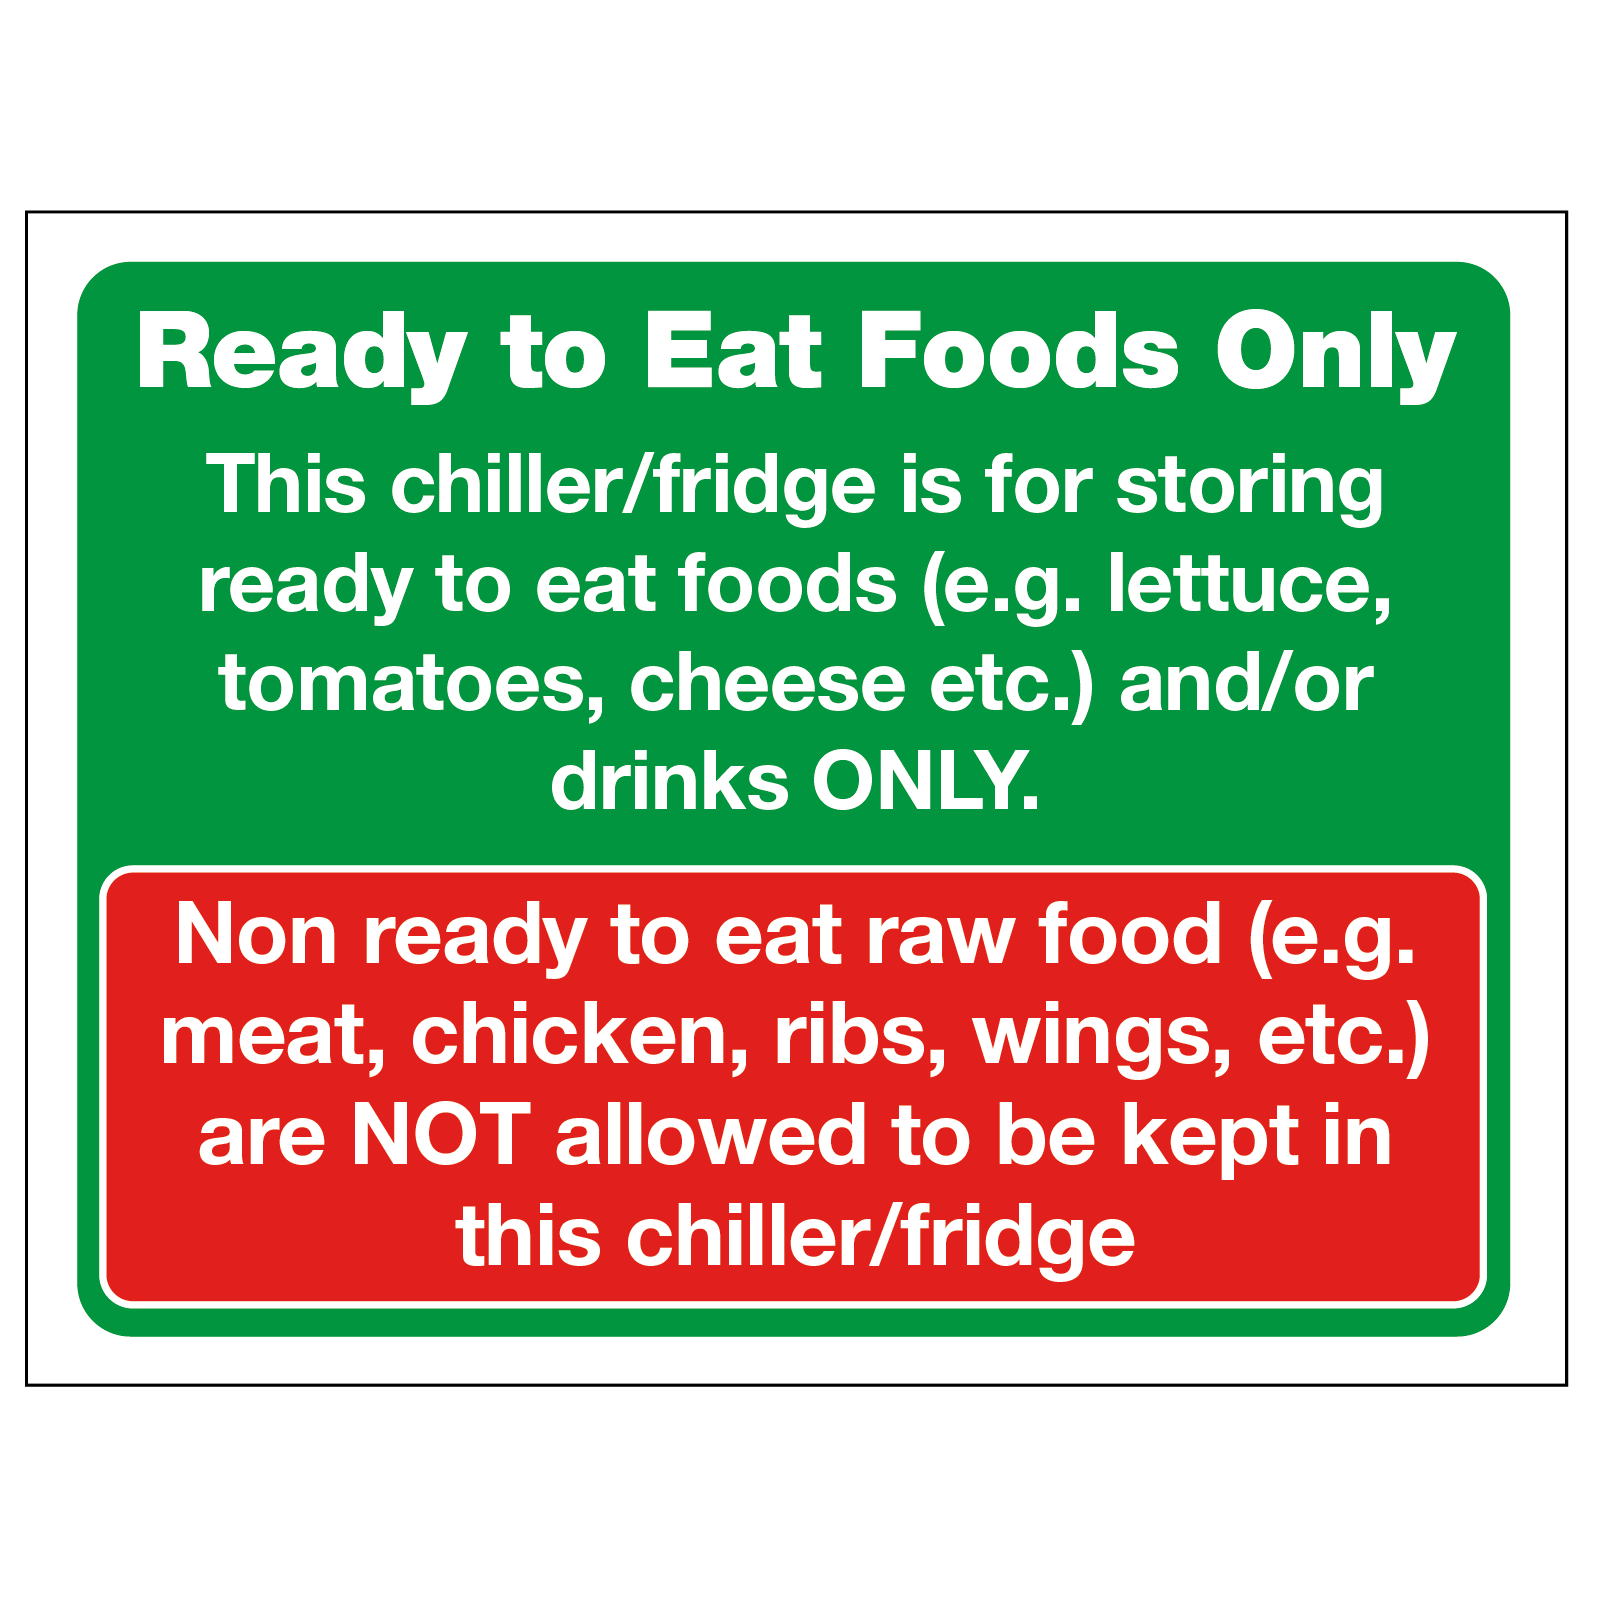 Ready to Eat Foods Only Notice